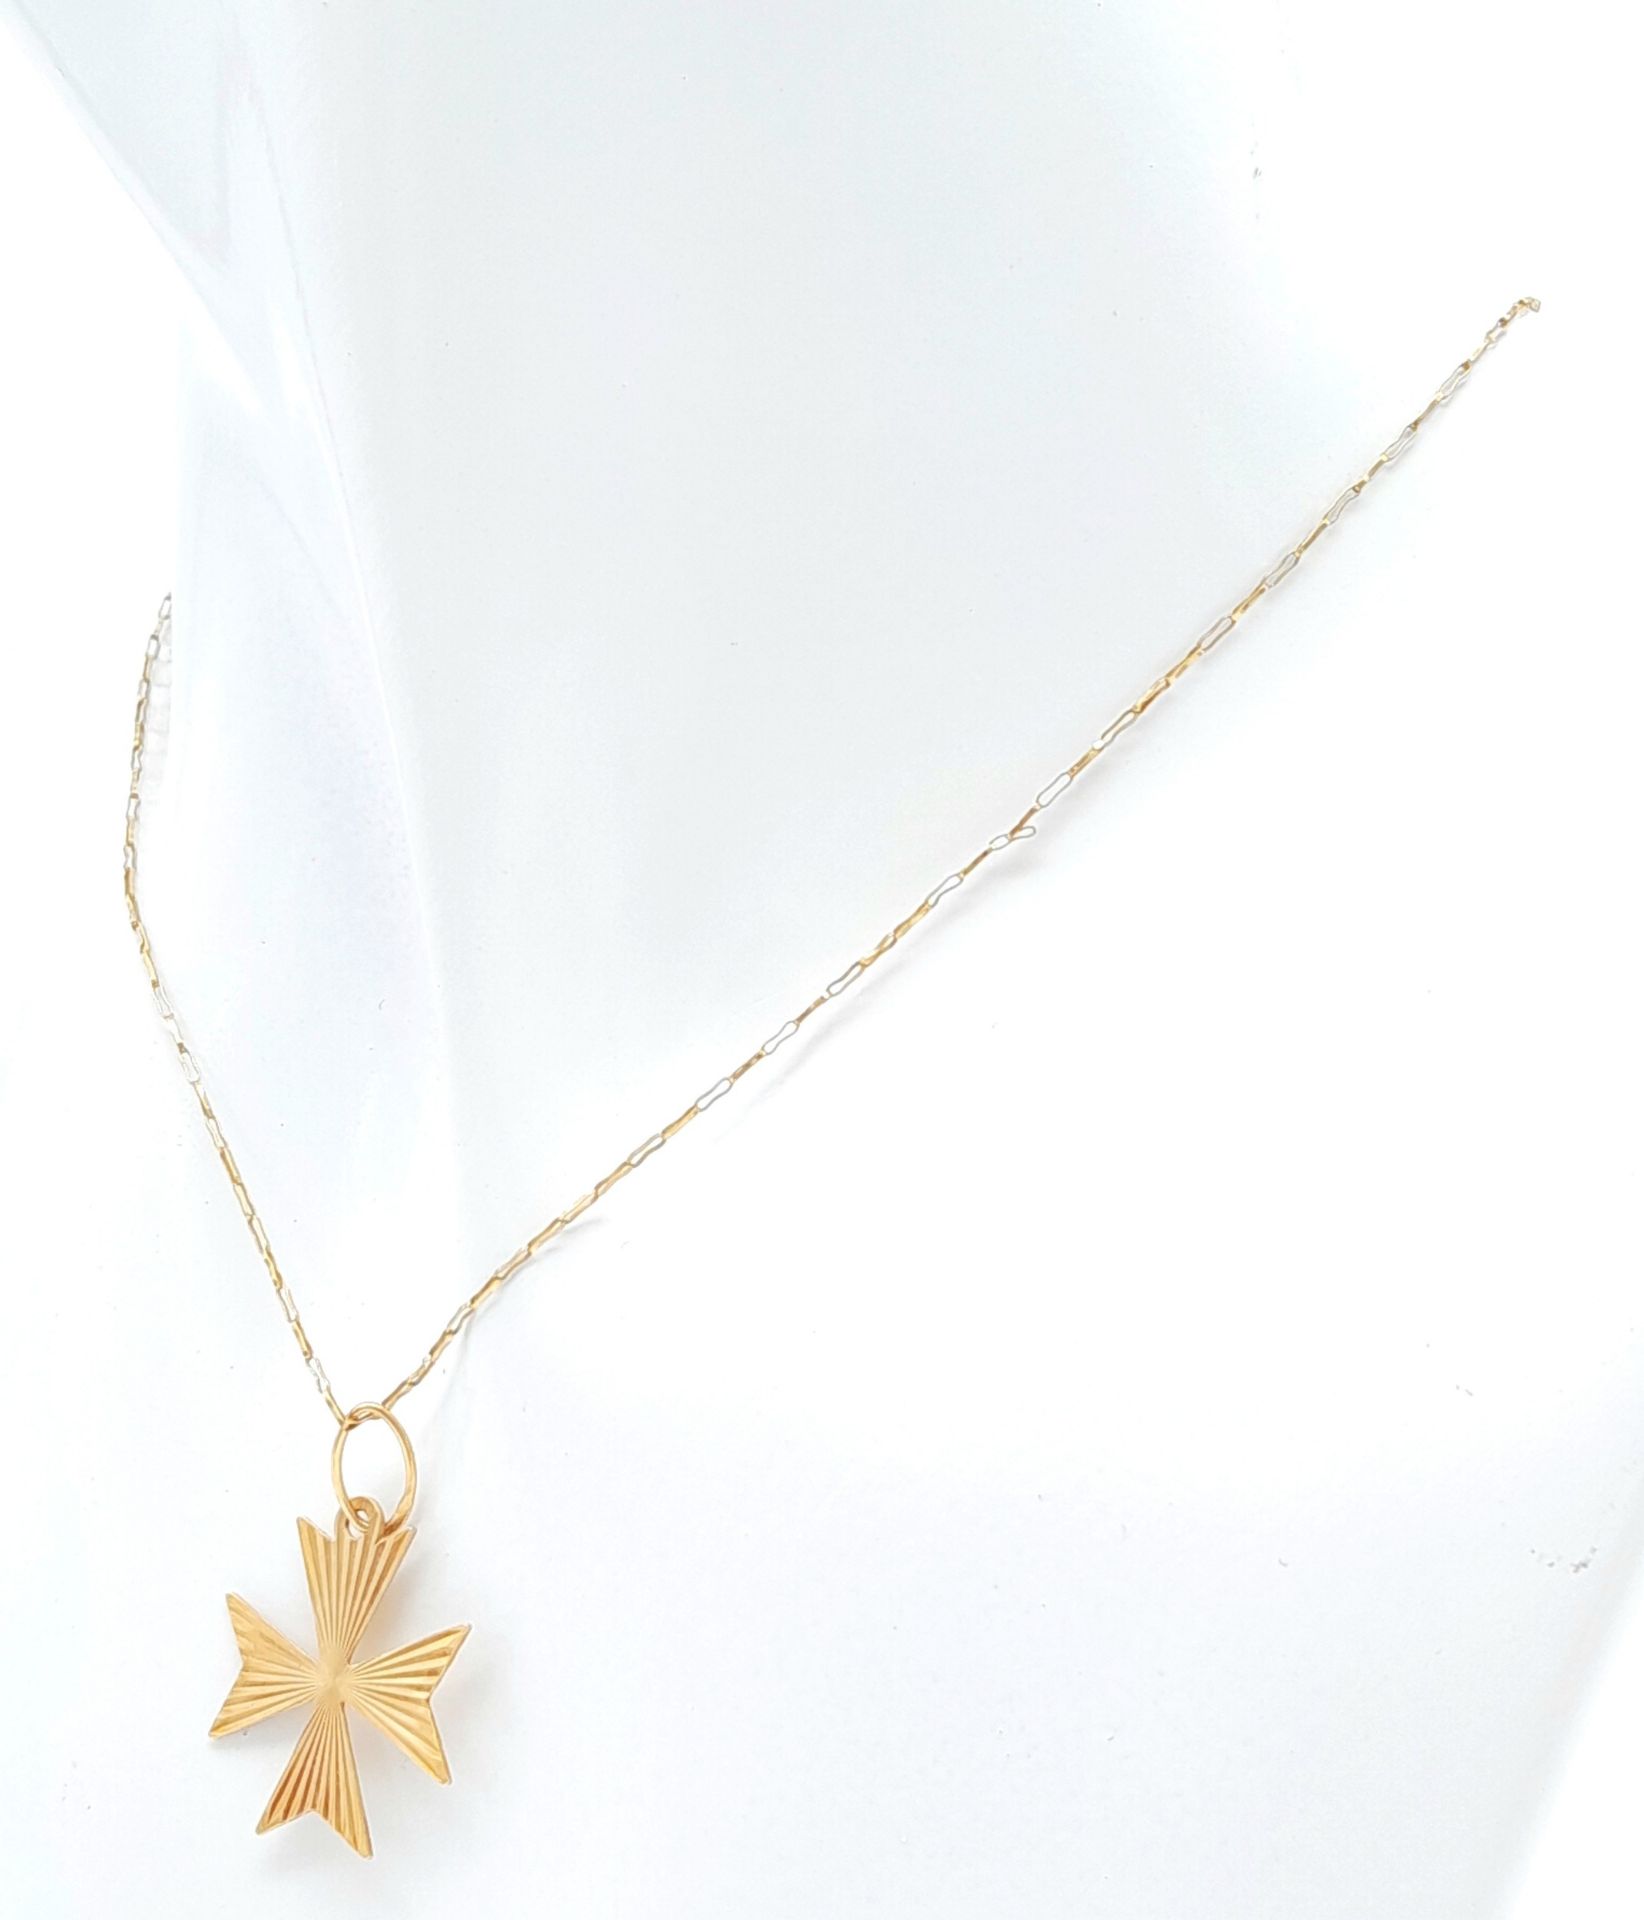 9 K yellow gold chain necklace with a Maltese cross pendant (12 x 12 mm), chain length: 51 cm, total - Bild 2 aus 5